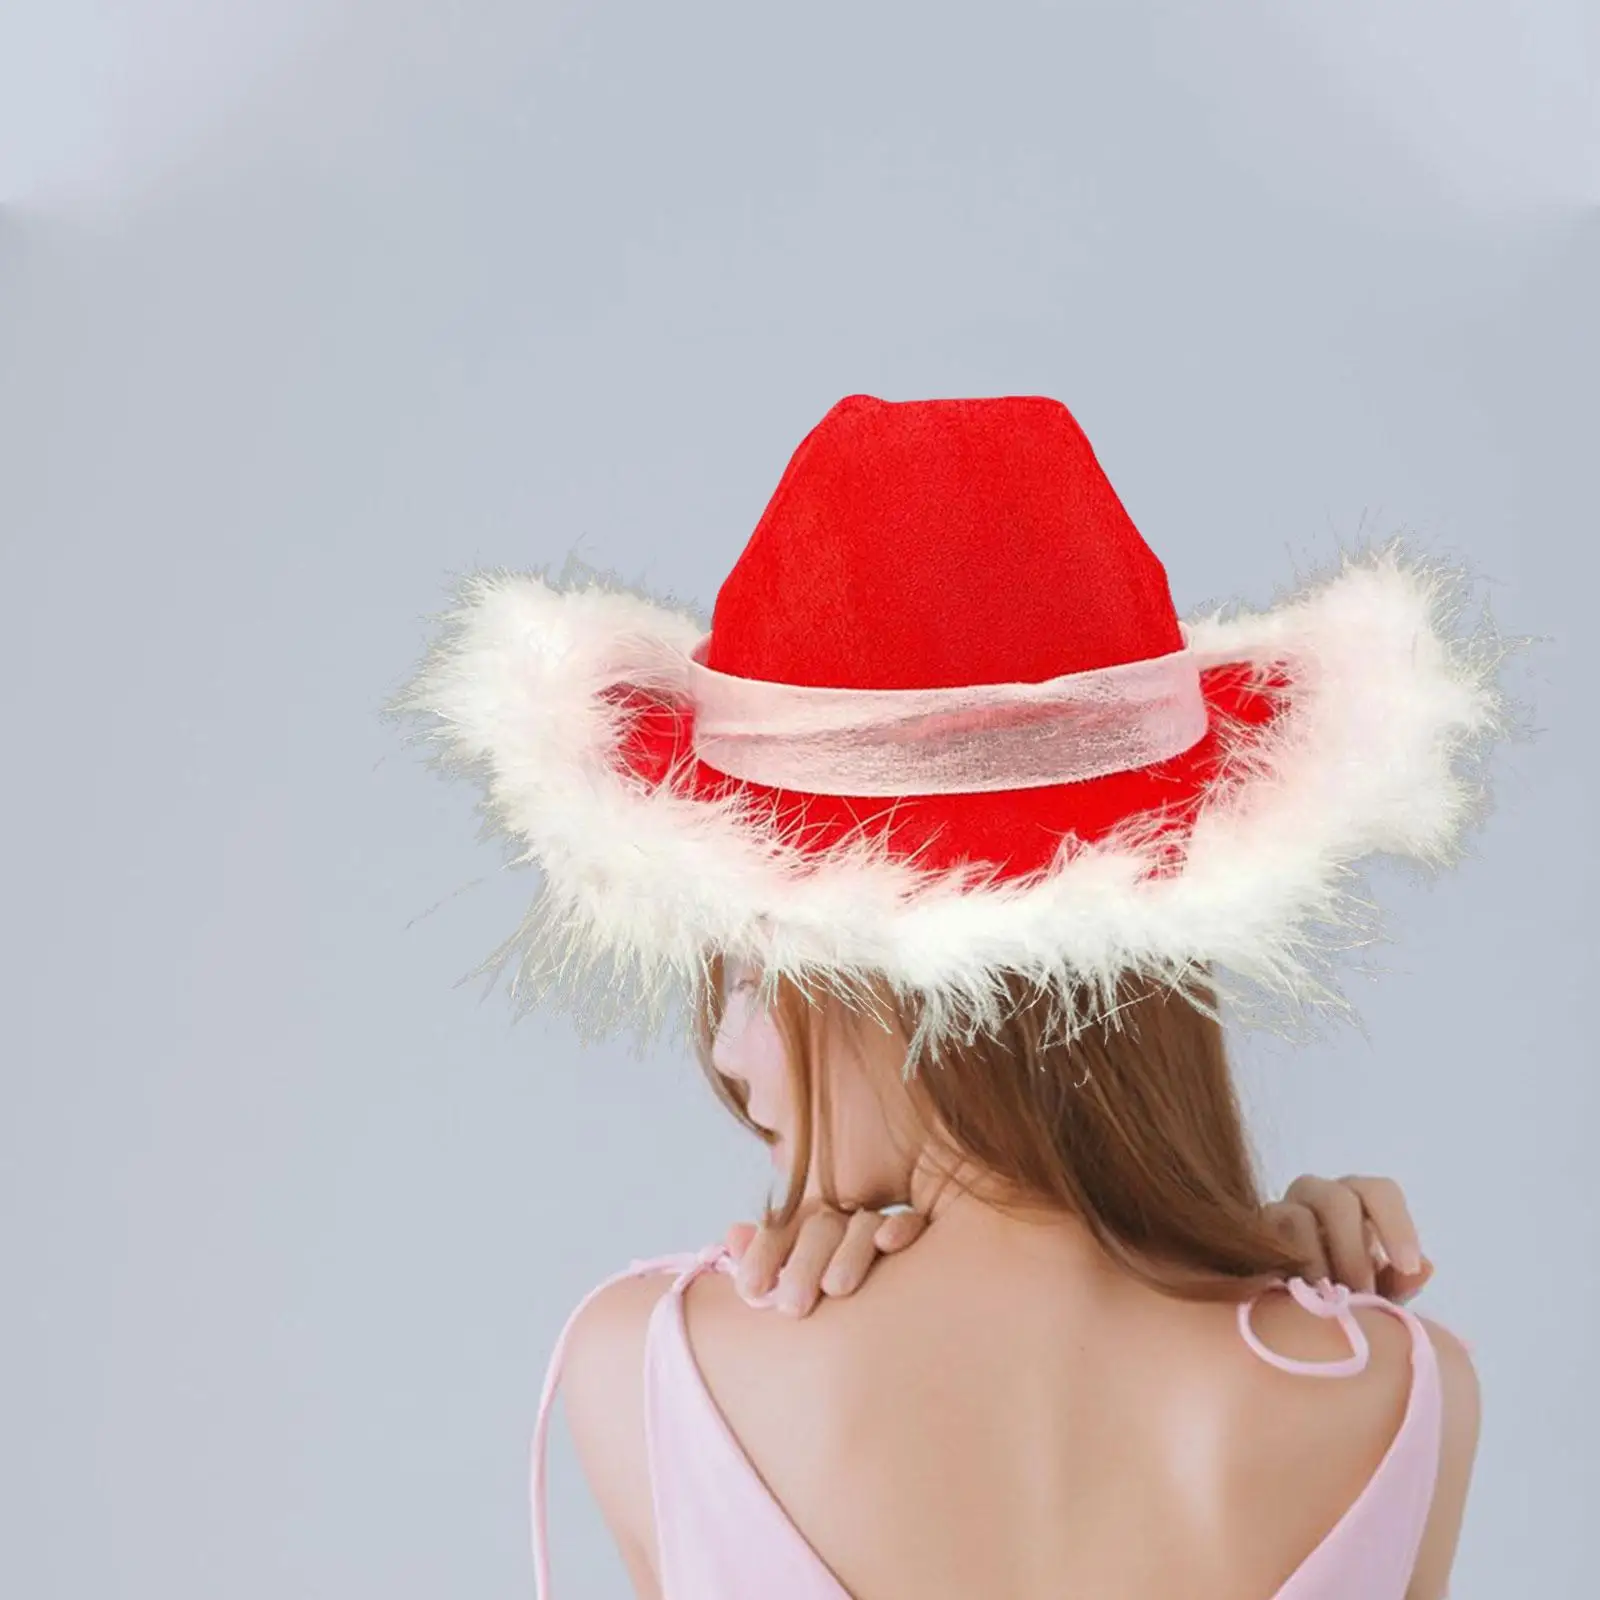 Red Cowboy Hat Western Wide Brim Supply with Feathers Cowgirl Hat for Christmas Party Costume Accessories Men Women Adult